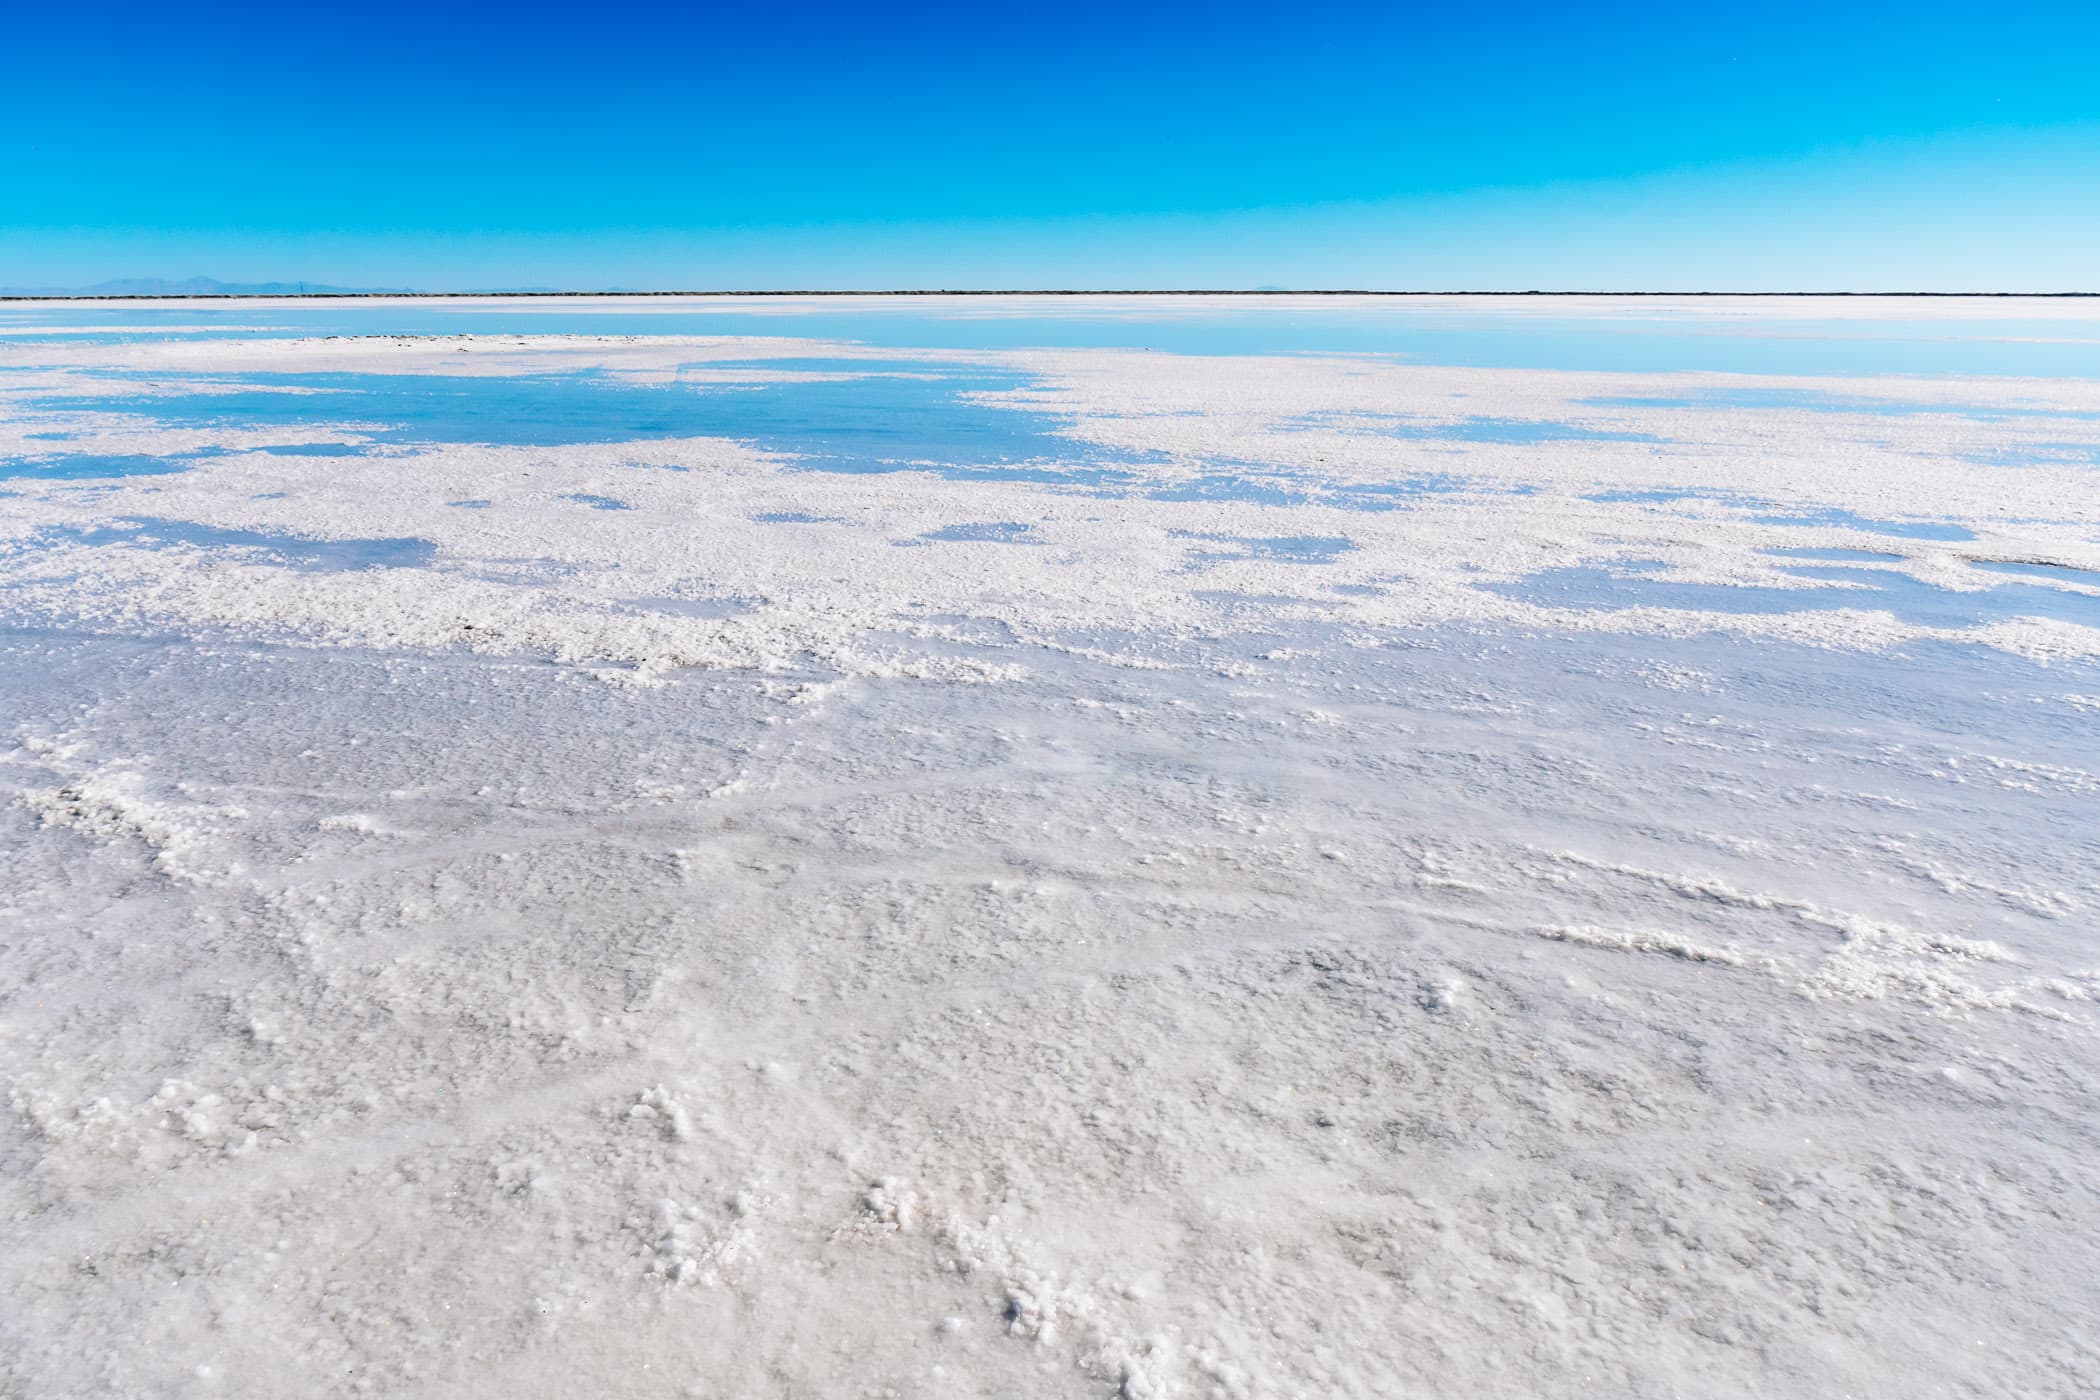 Utah's Bonneville Salt Flats seem to stretch into the distance for forever.